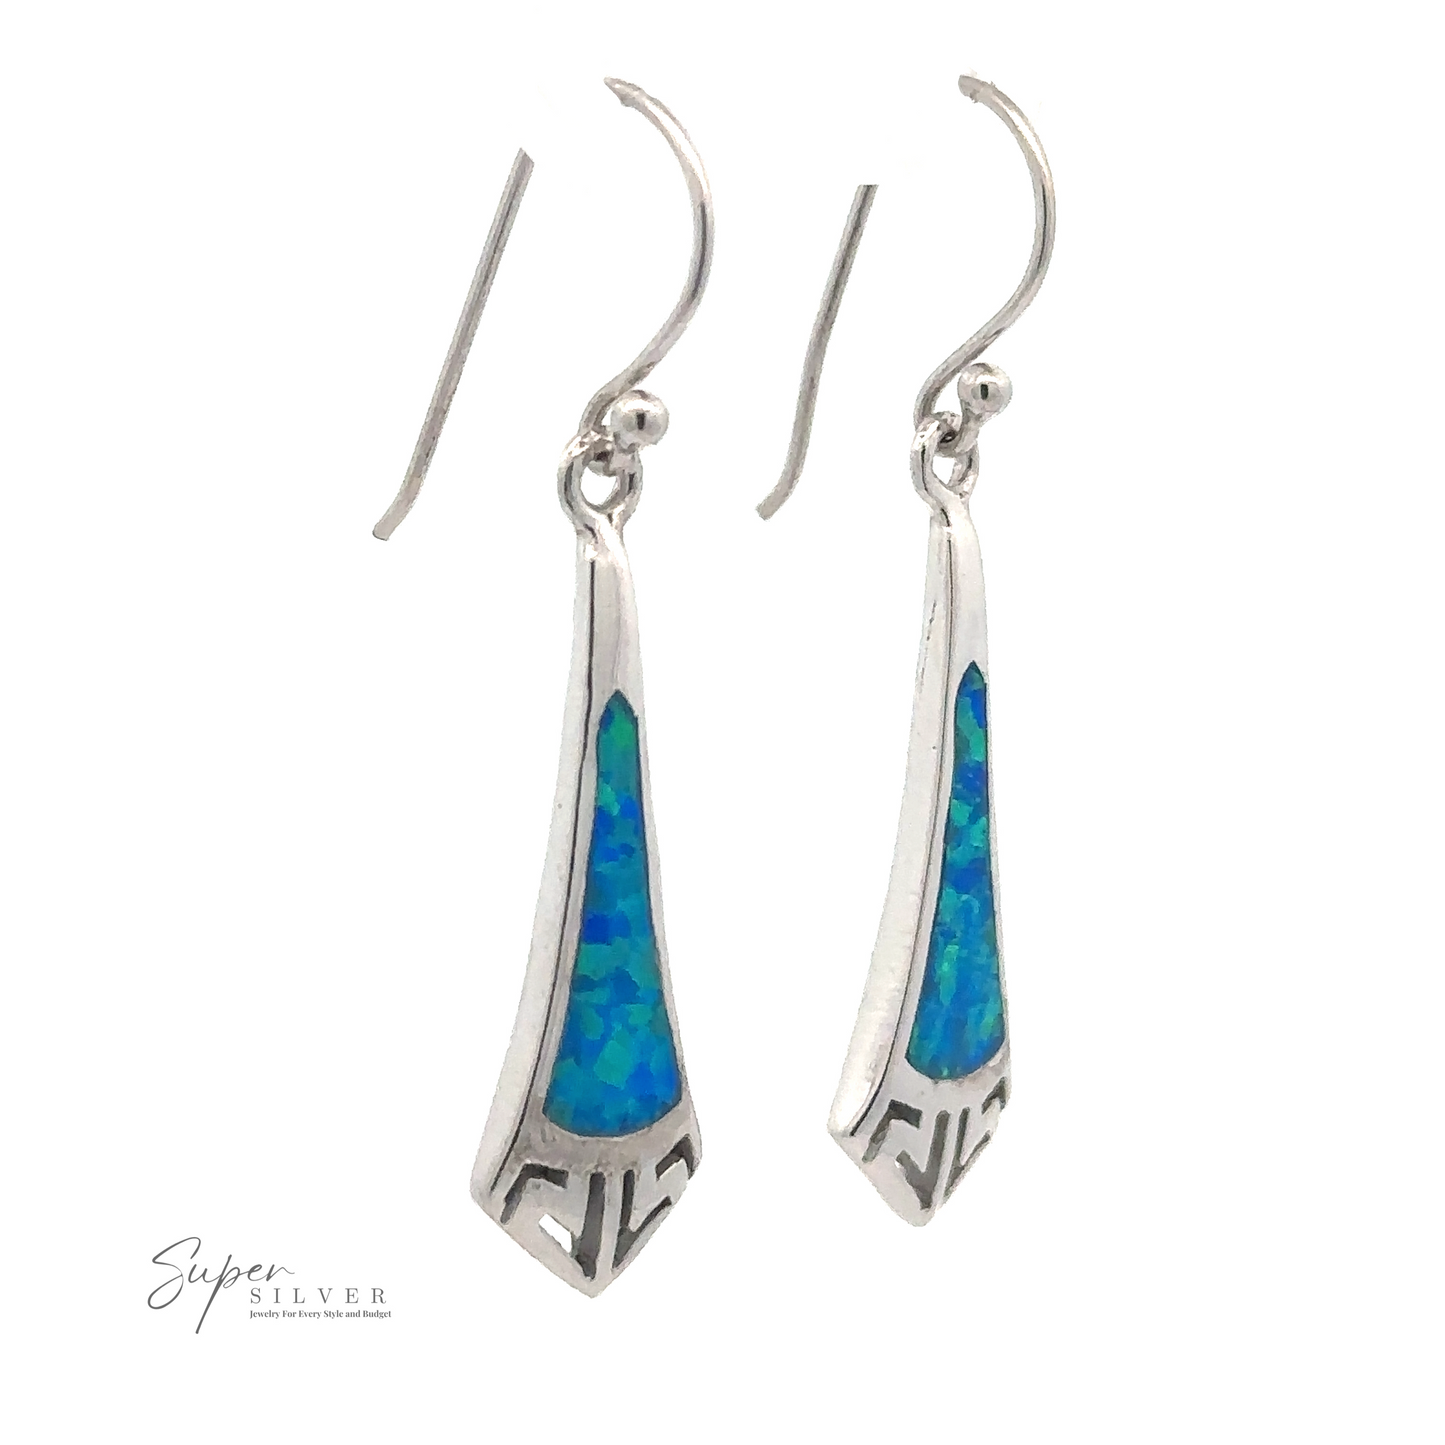 A pair of Blue Created Opal Elongated Tie Shape Earrings, featuring delicate cut-out details and blue-green inlay designs, displayed against a white background.